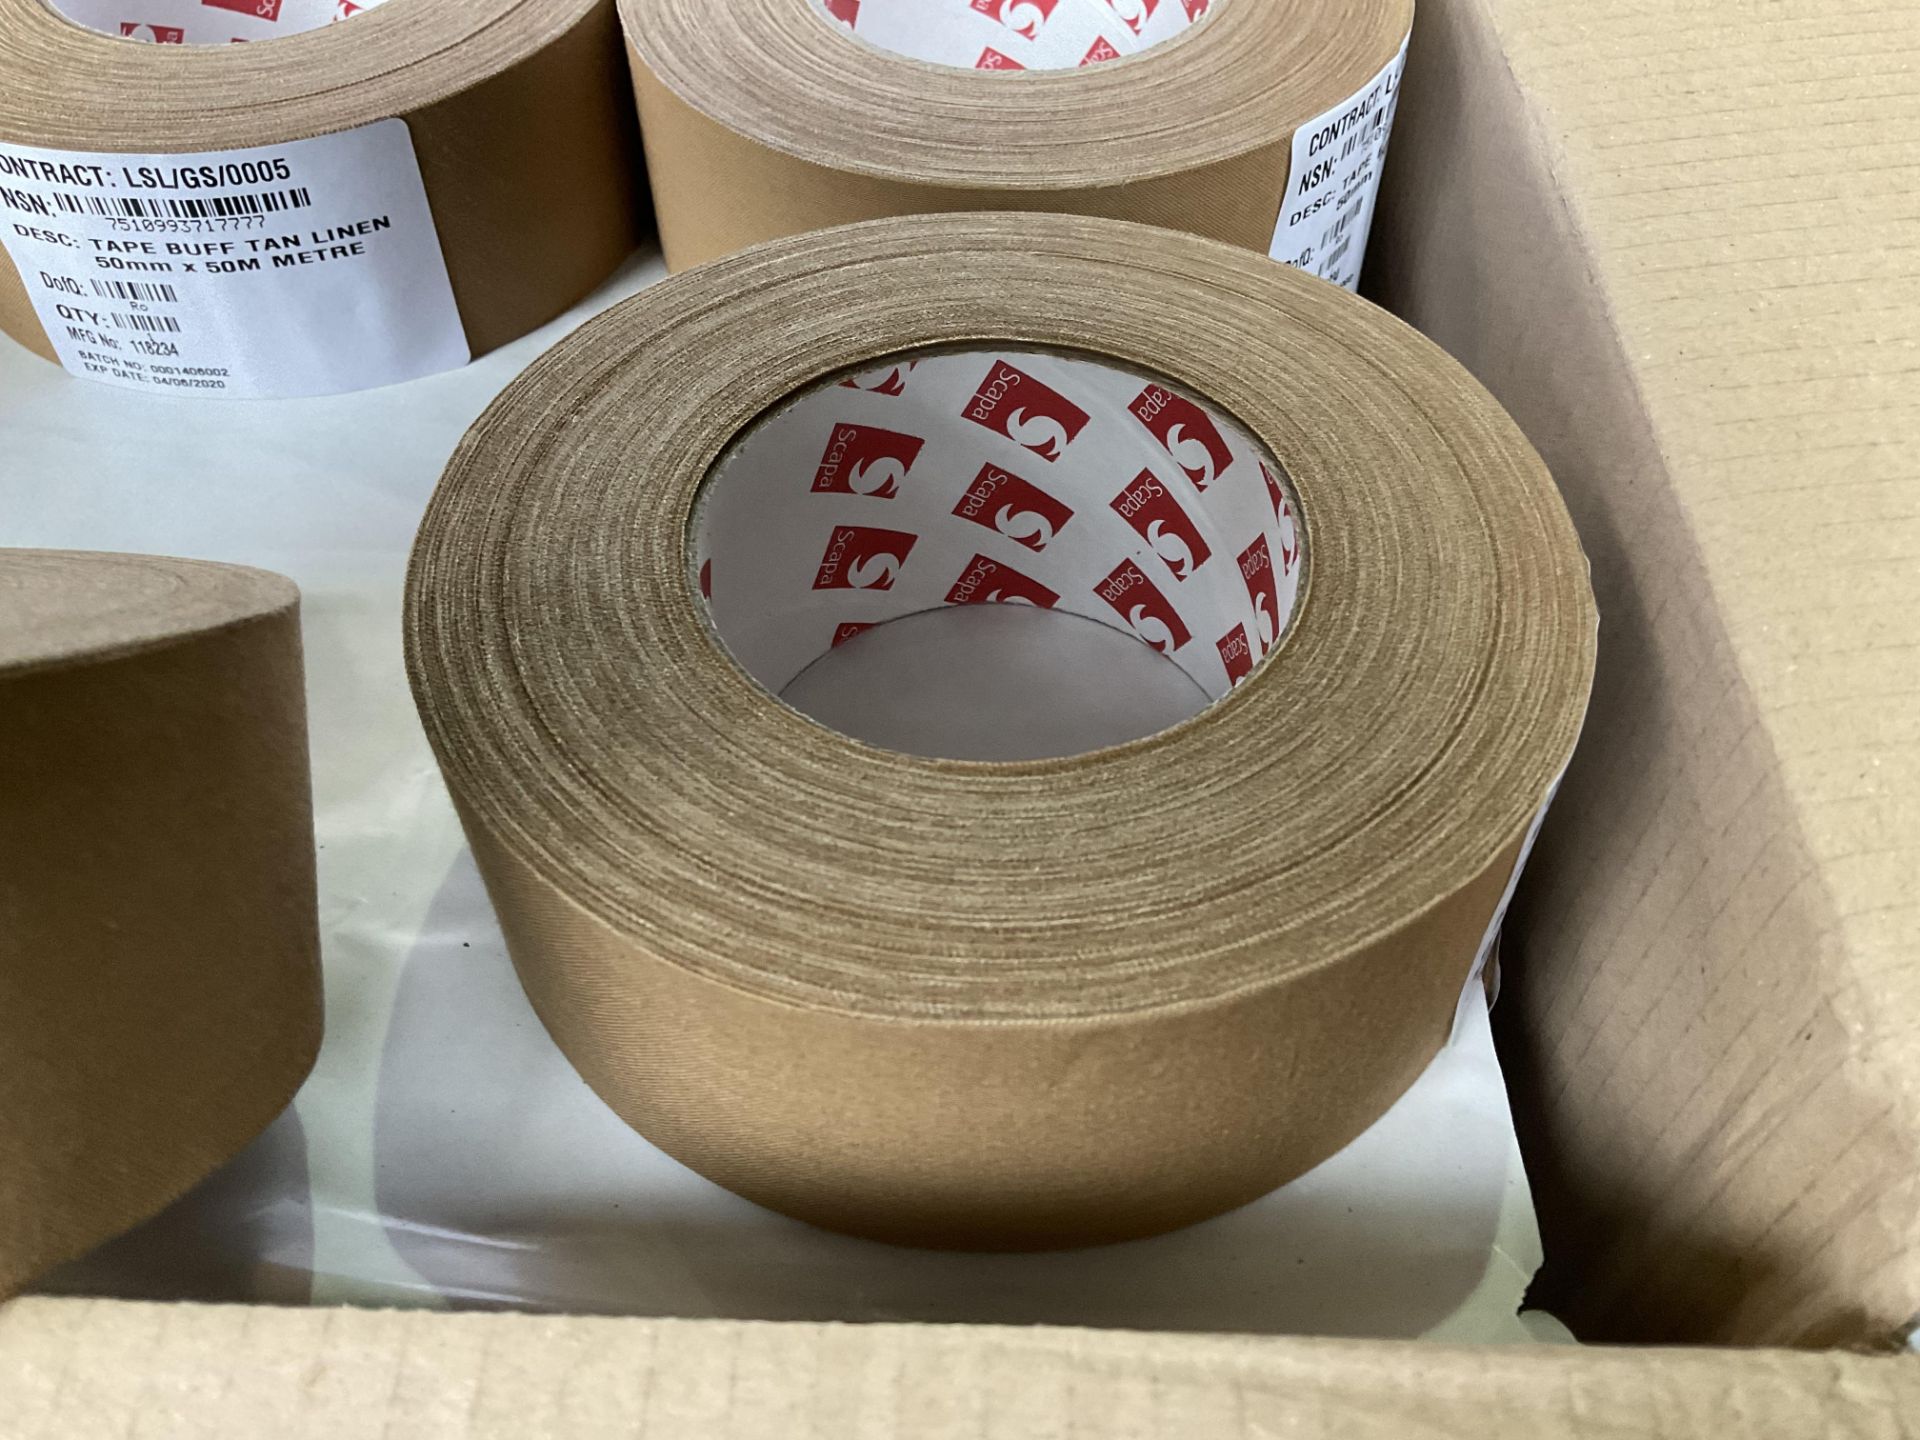 16X 50m ROLLS OF TAPE BUFF TAN LINEN NEW IN ORIGINAL PACKING - Image 2 of 4